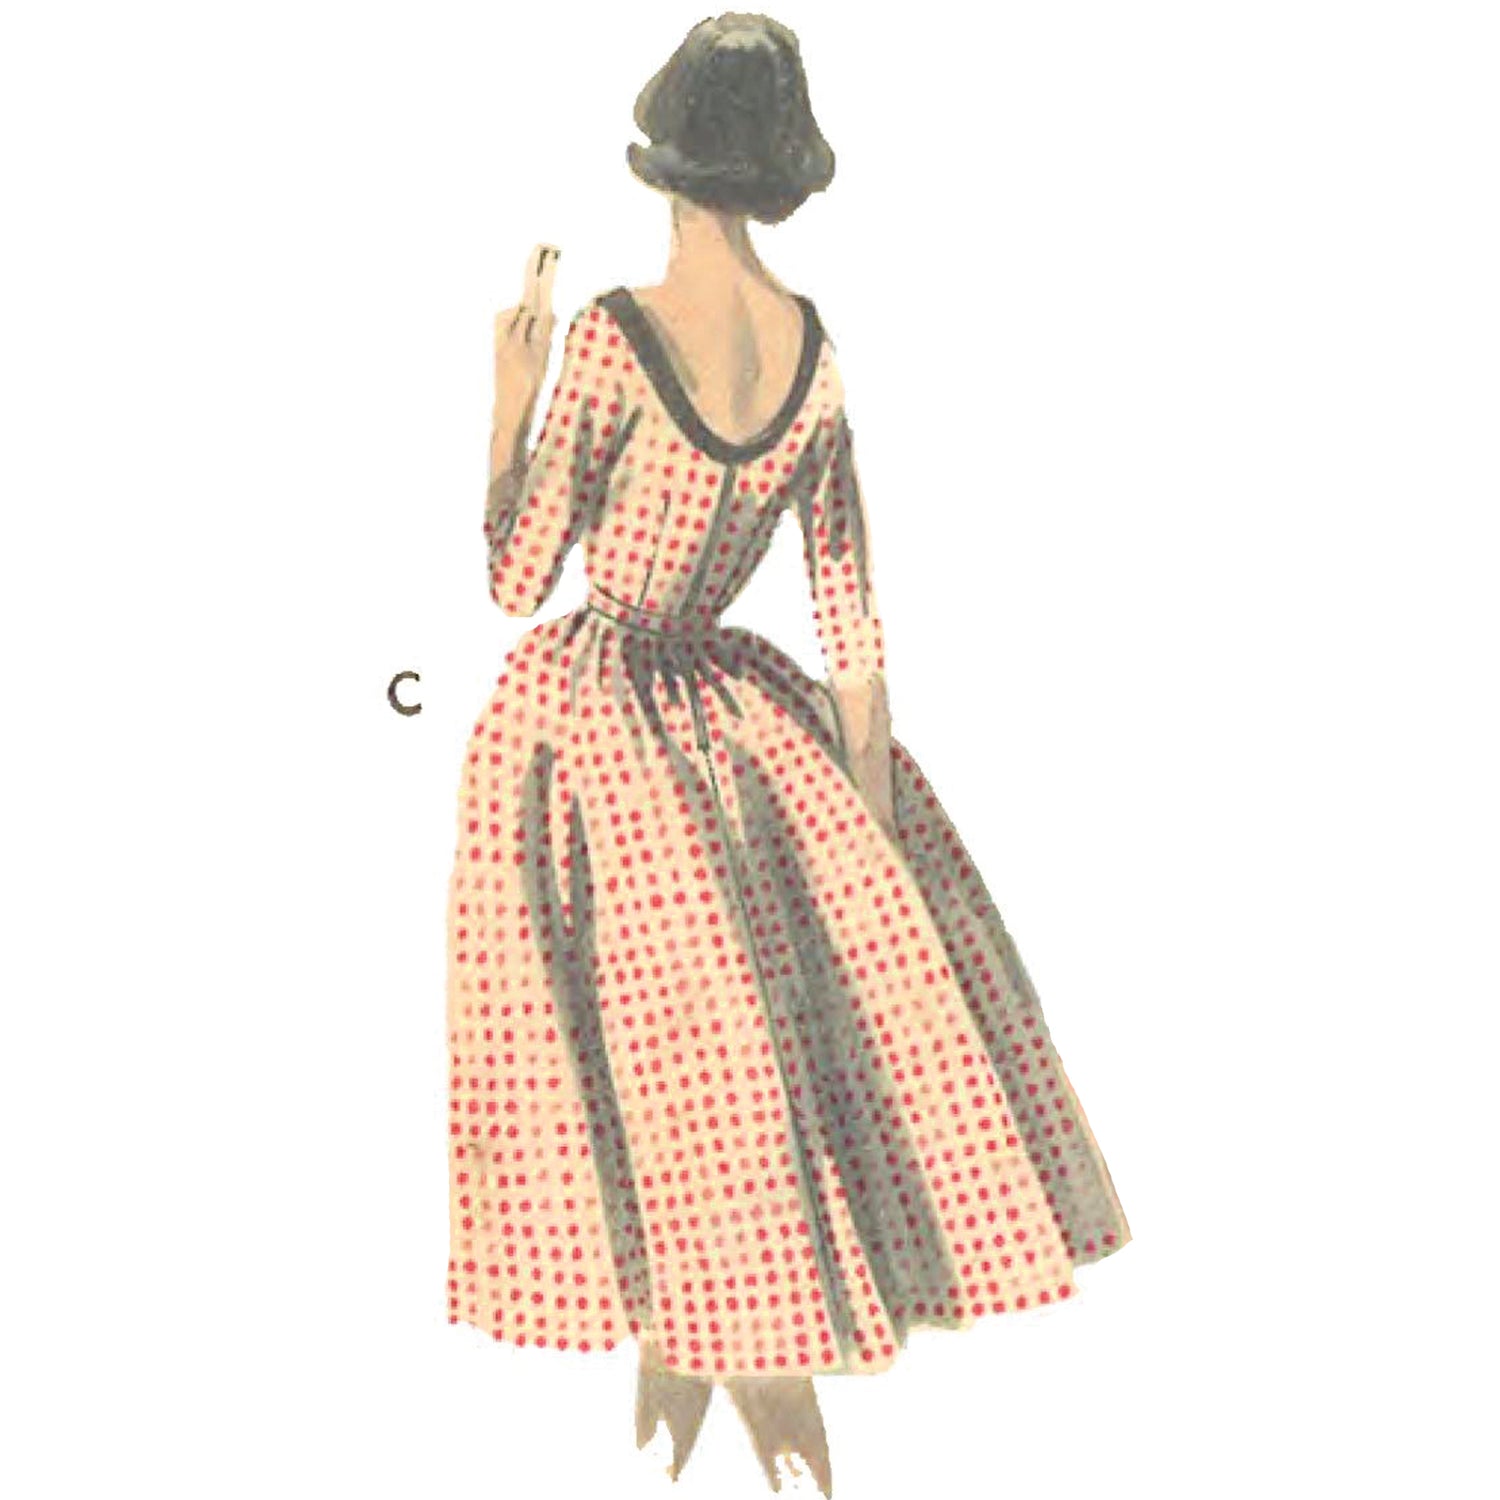 Models wearing Dresses made from sewing pattern butterick 8083